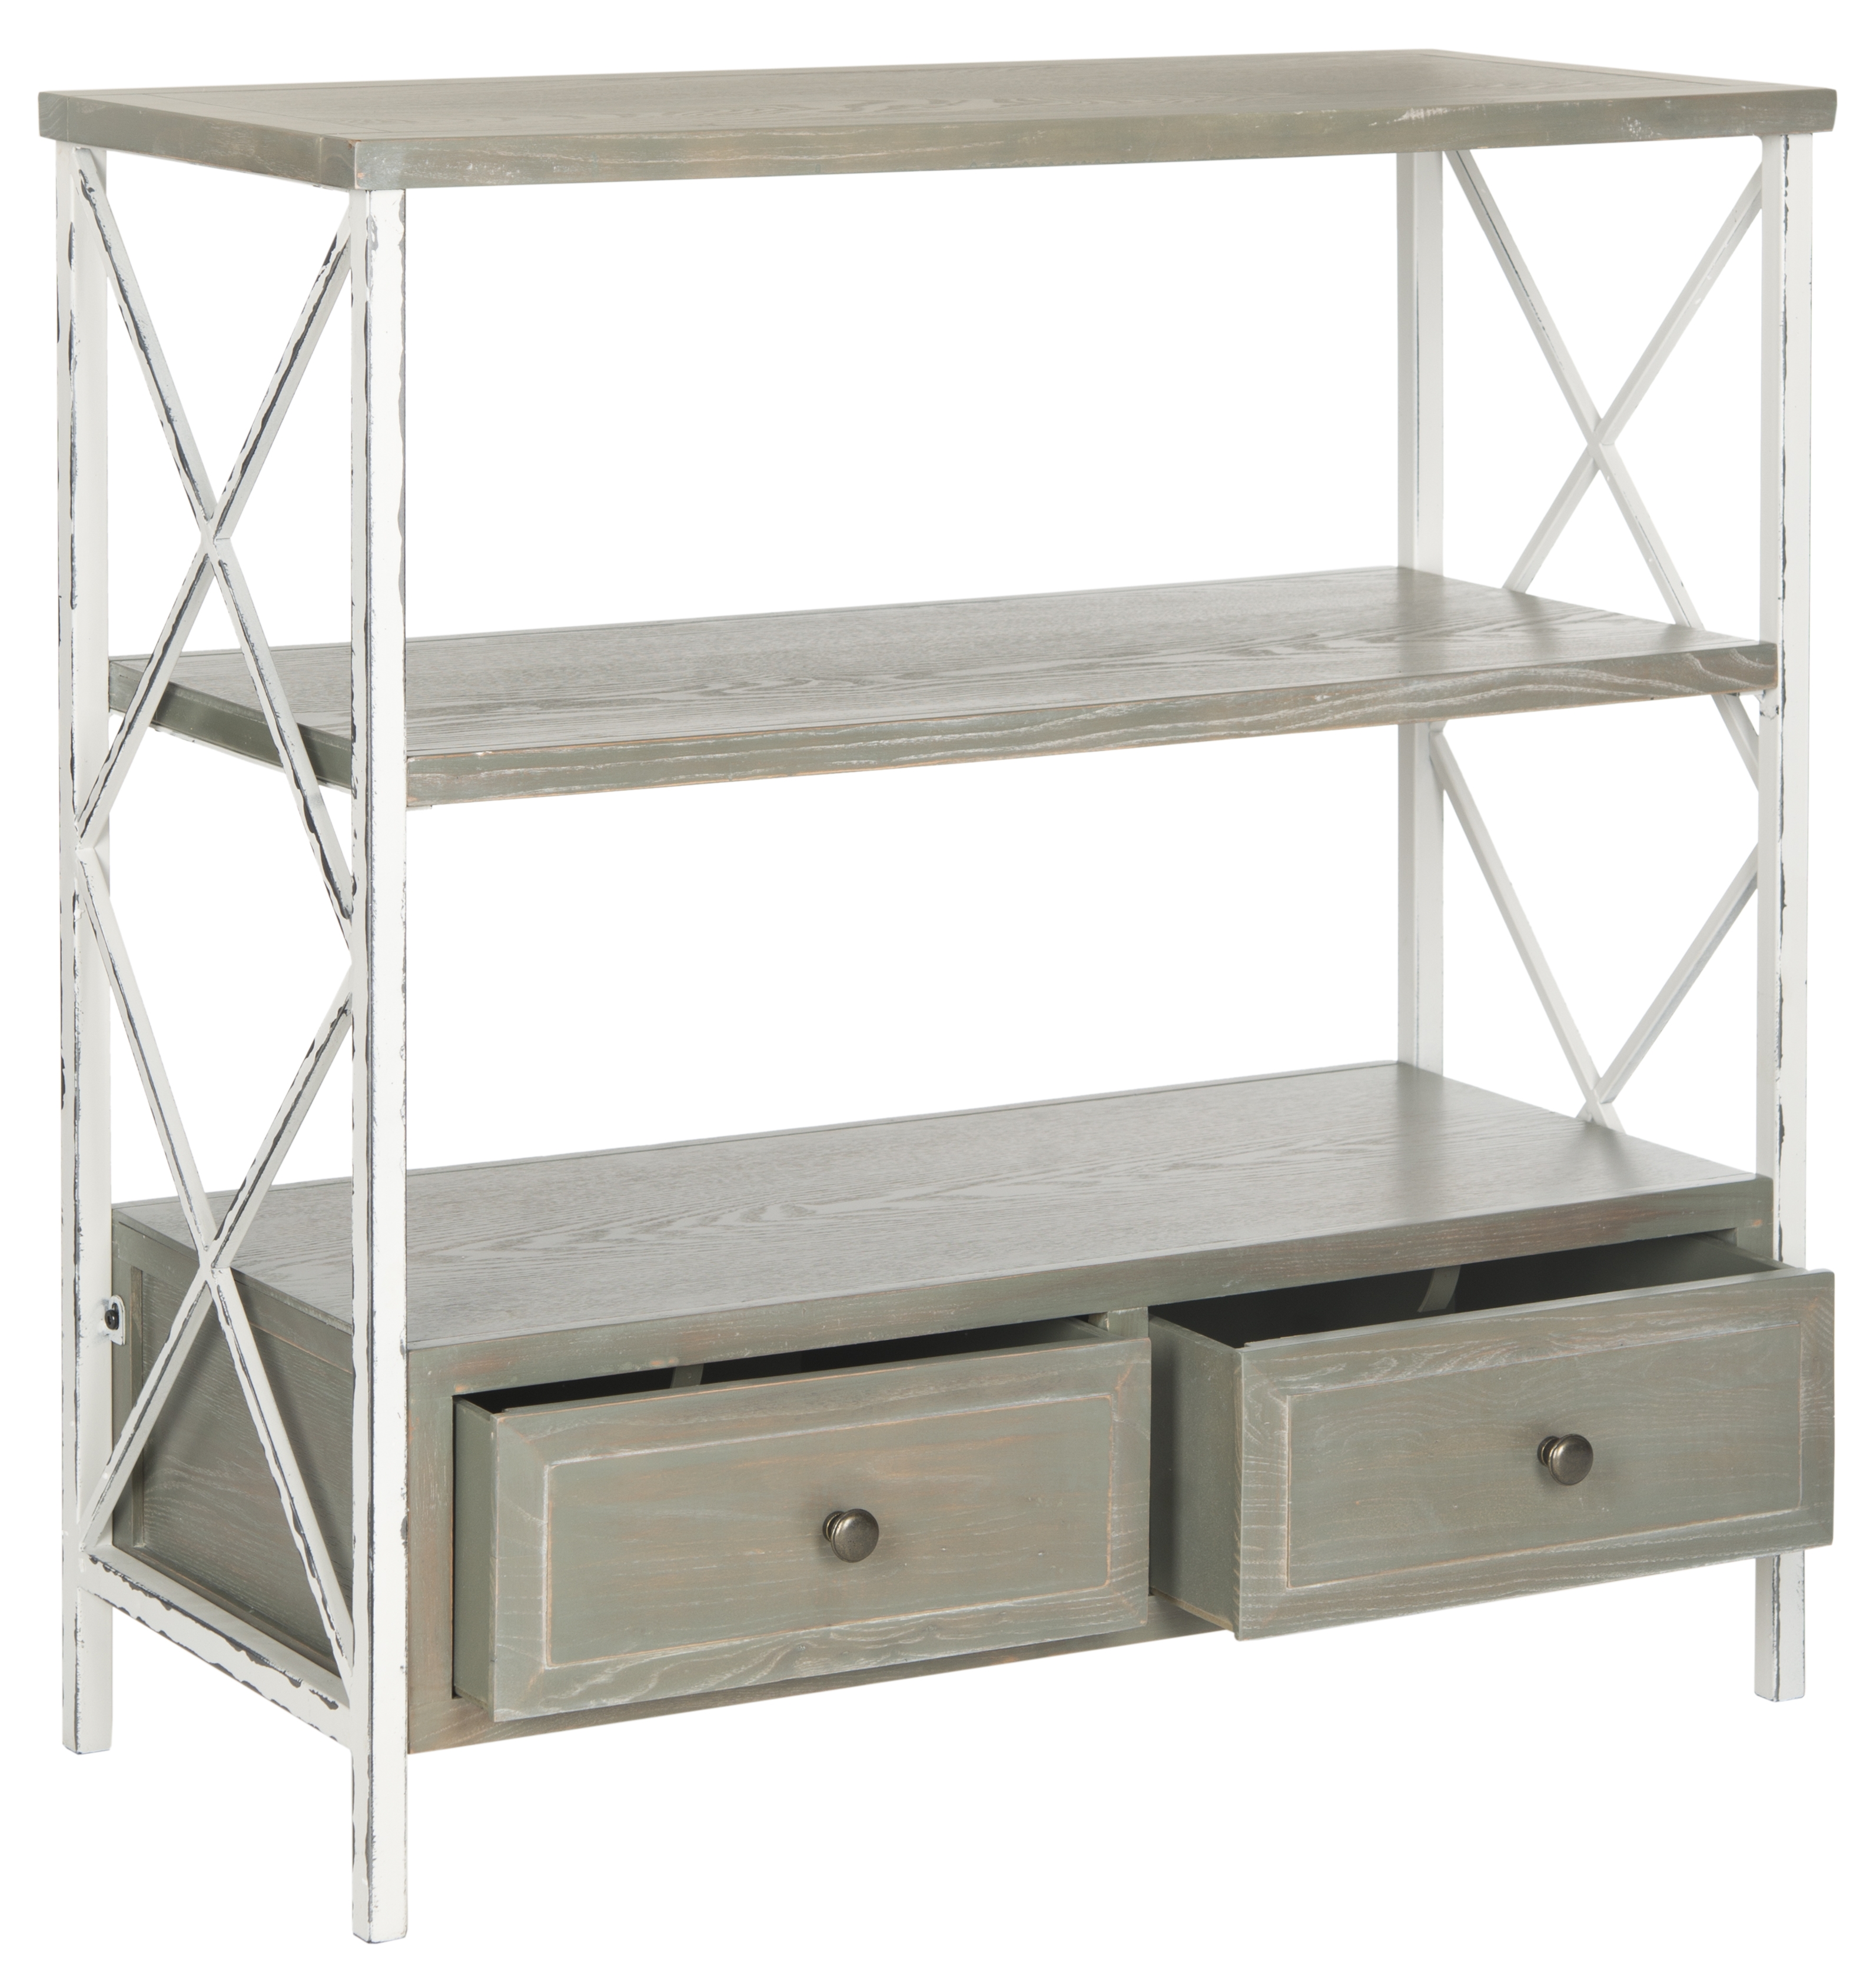 Chandra Console With Storage Drawers - French Grey/White Smoke - Arlo Home - Image 1